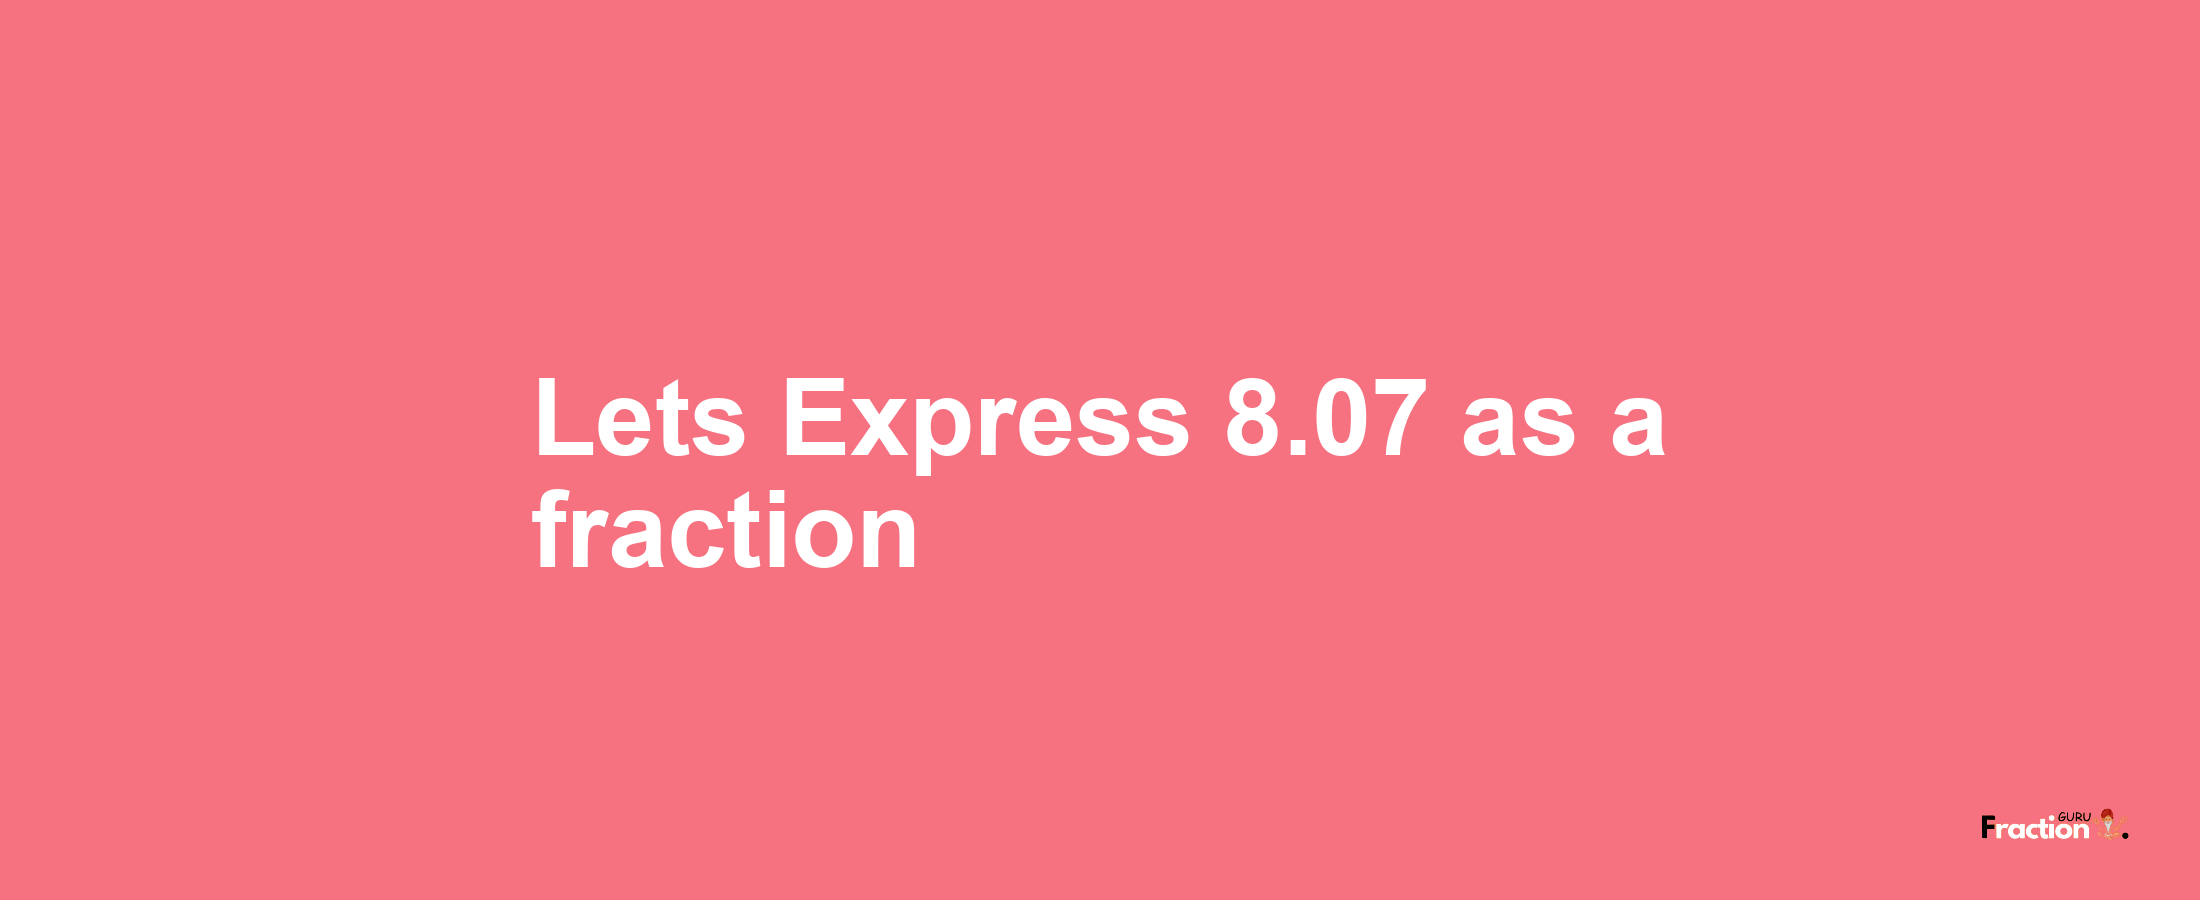 Lets Express 8.07 as afraction